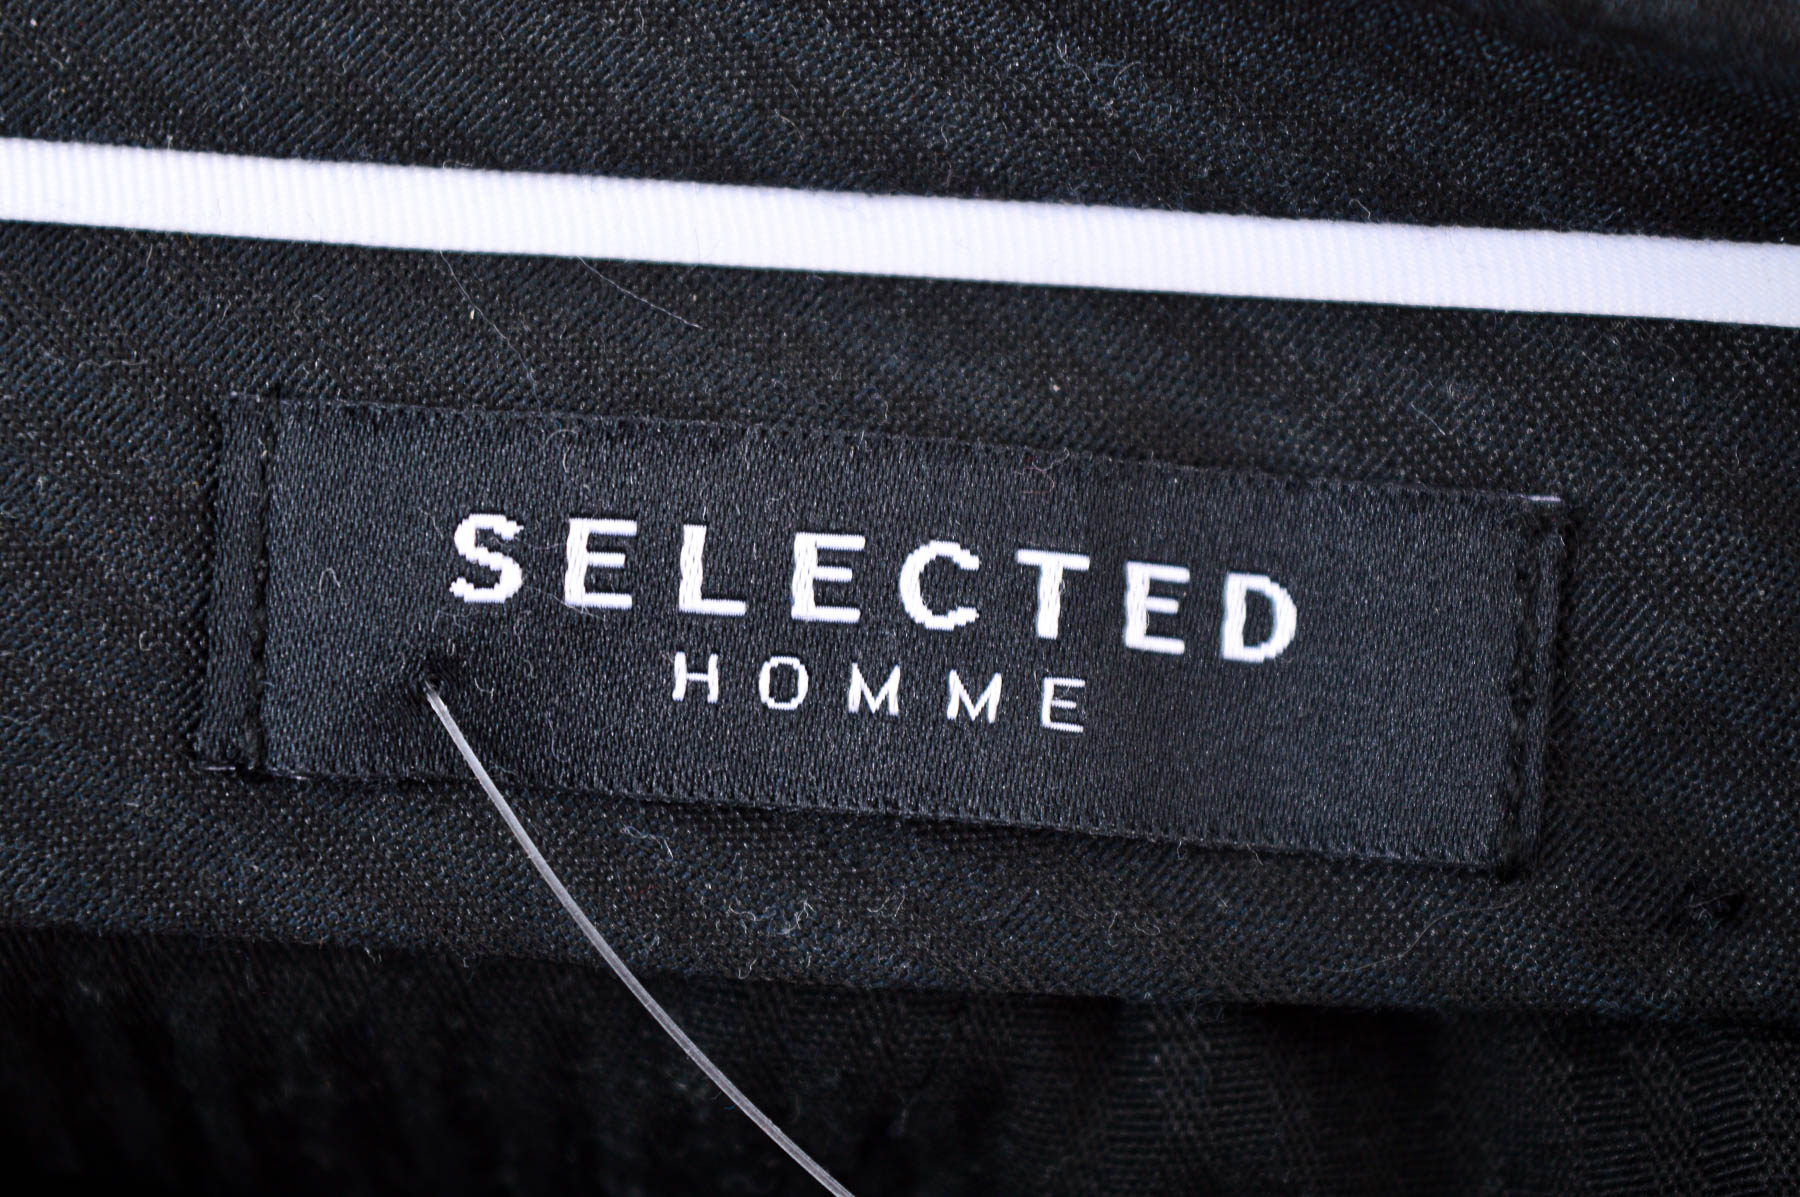 Men's trousers - SELECTED / HOMME - 2